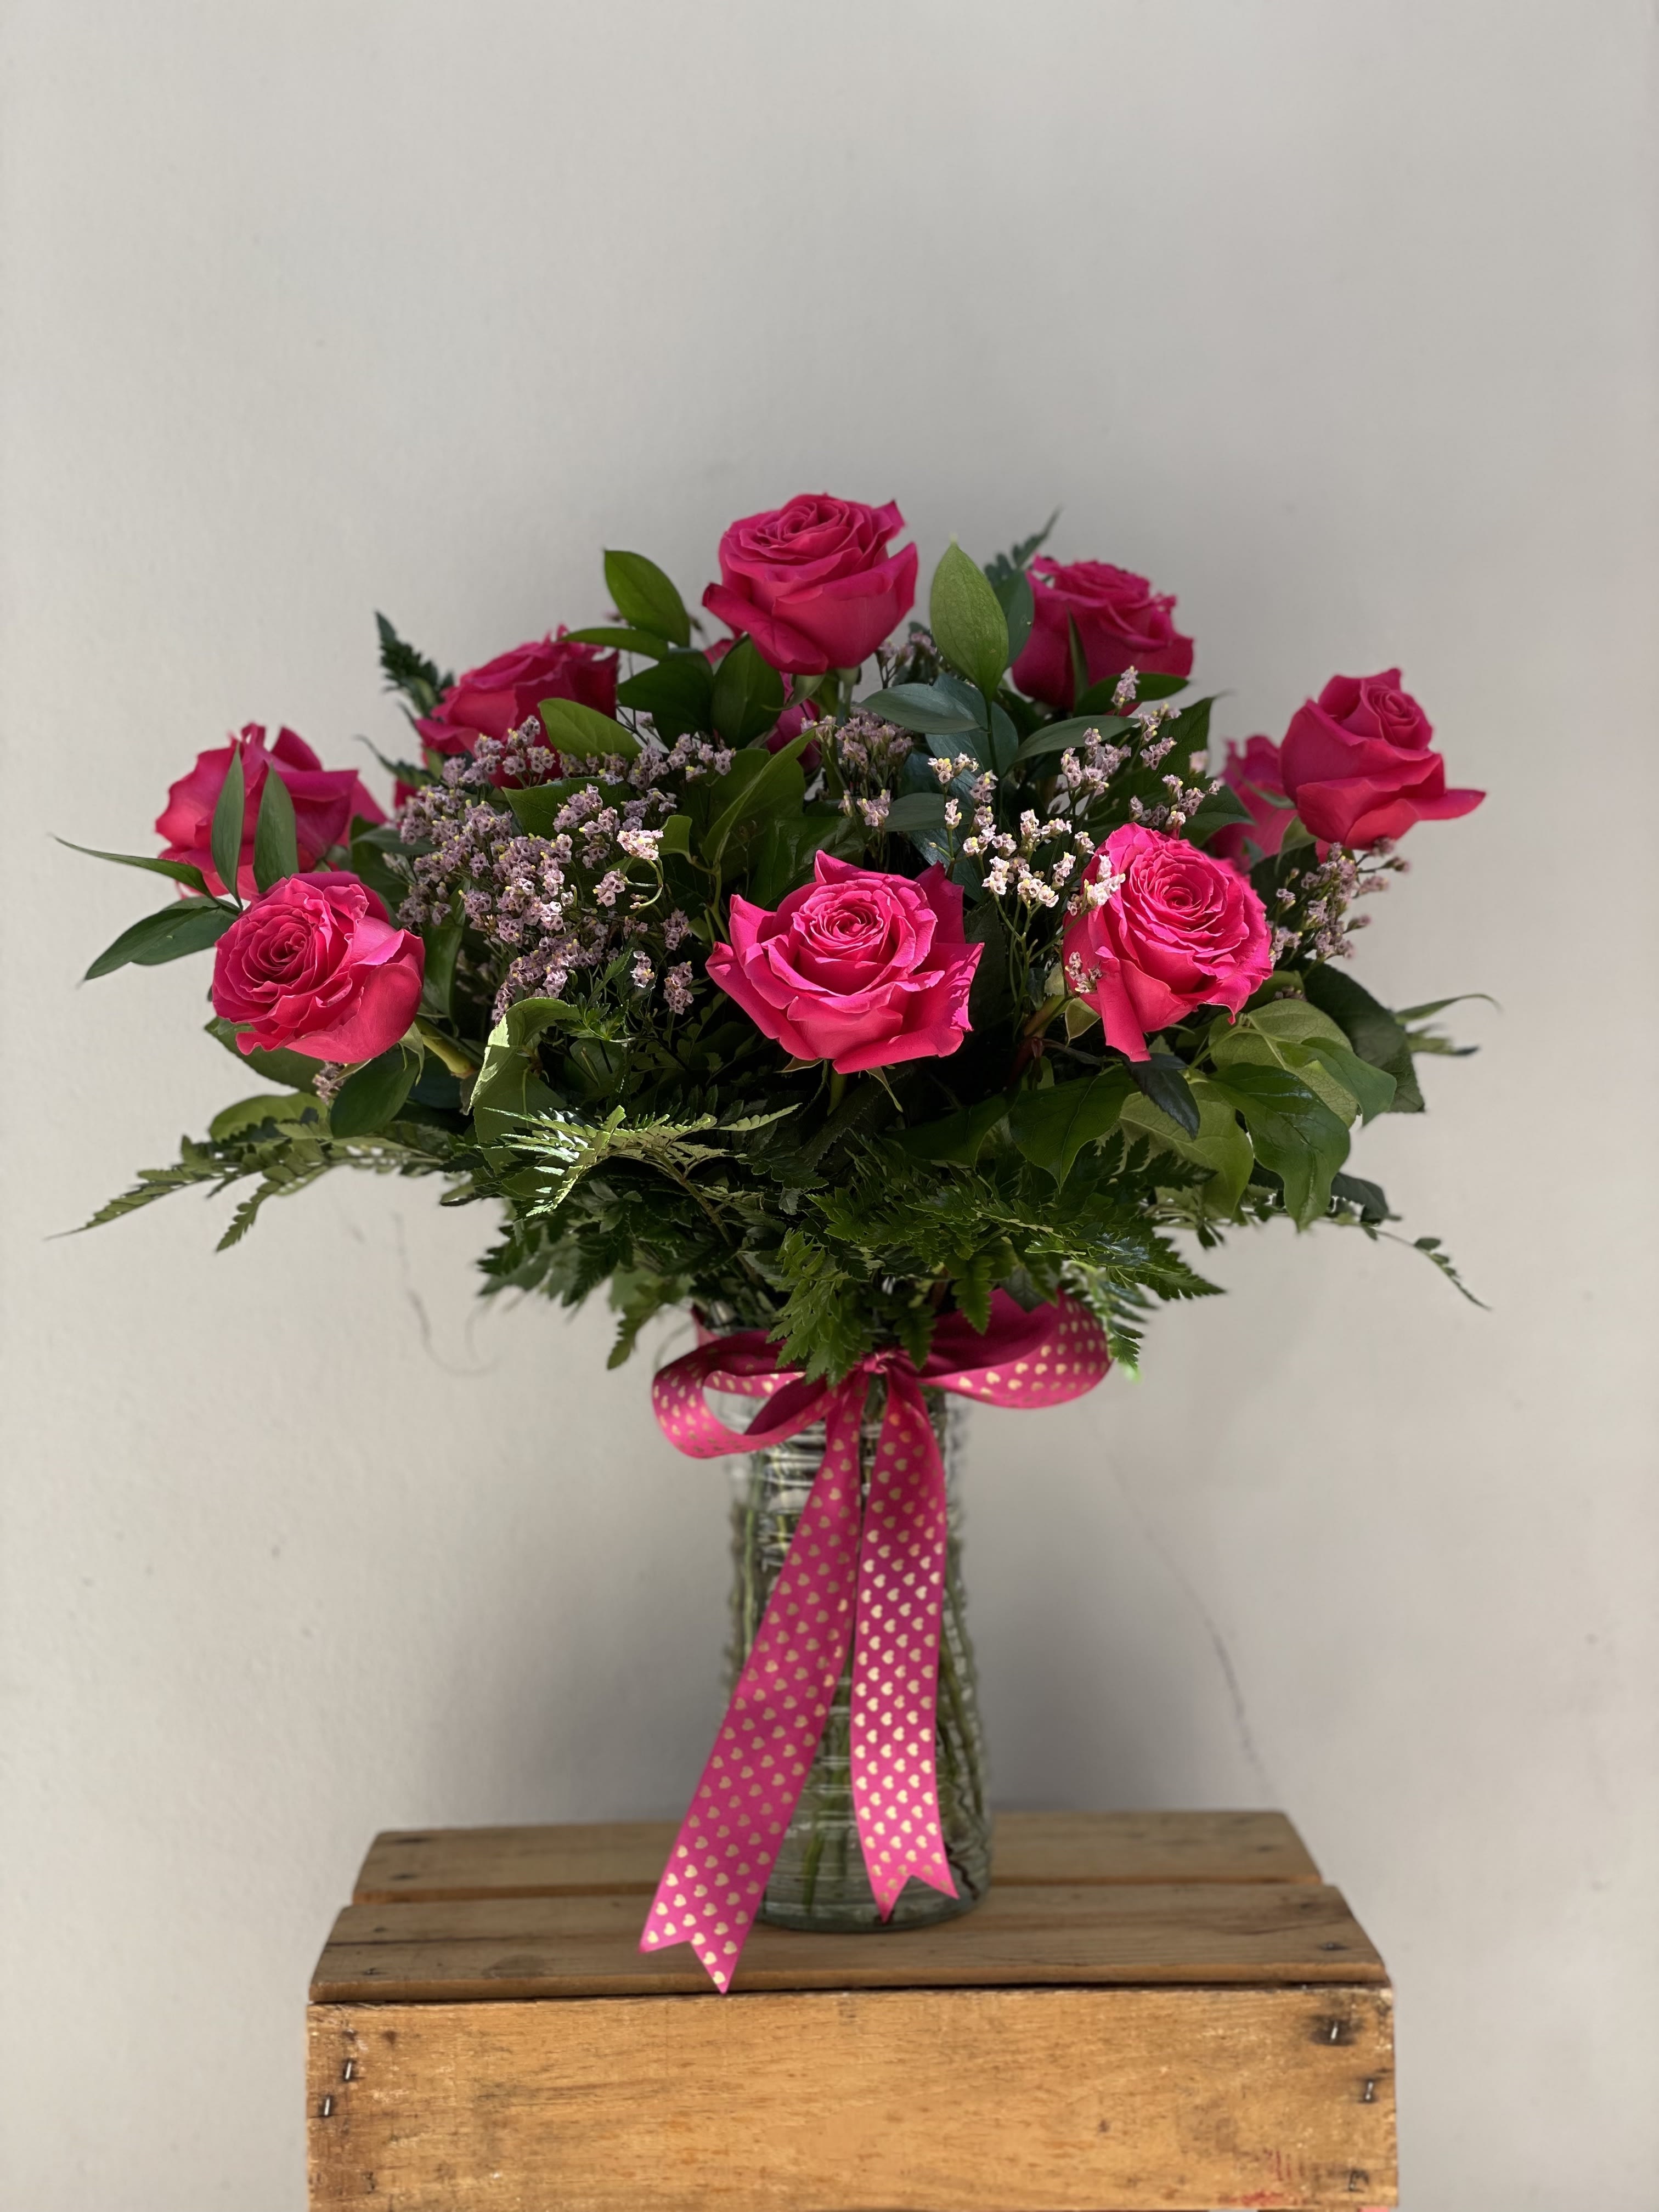 CLASSIC LOVE HOT PINK - Product Information Combination of greenery and best seasonal fillers, with hot pink roses arranged into a perfect bouquet.